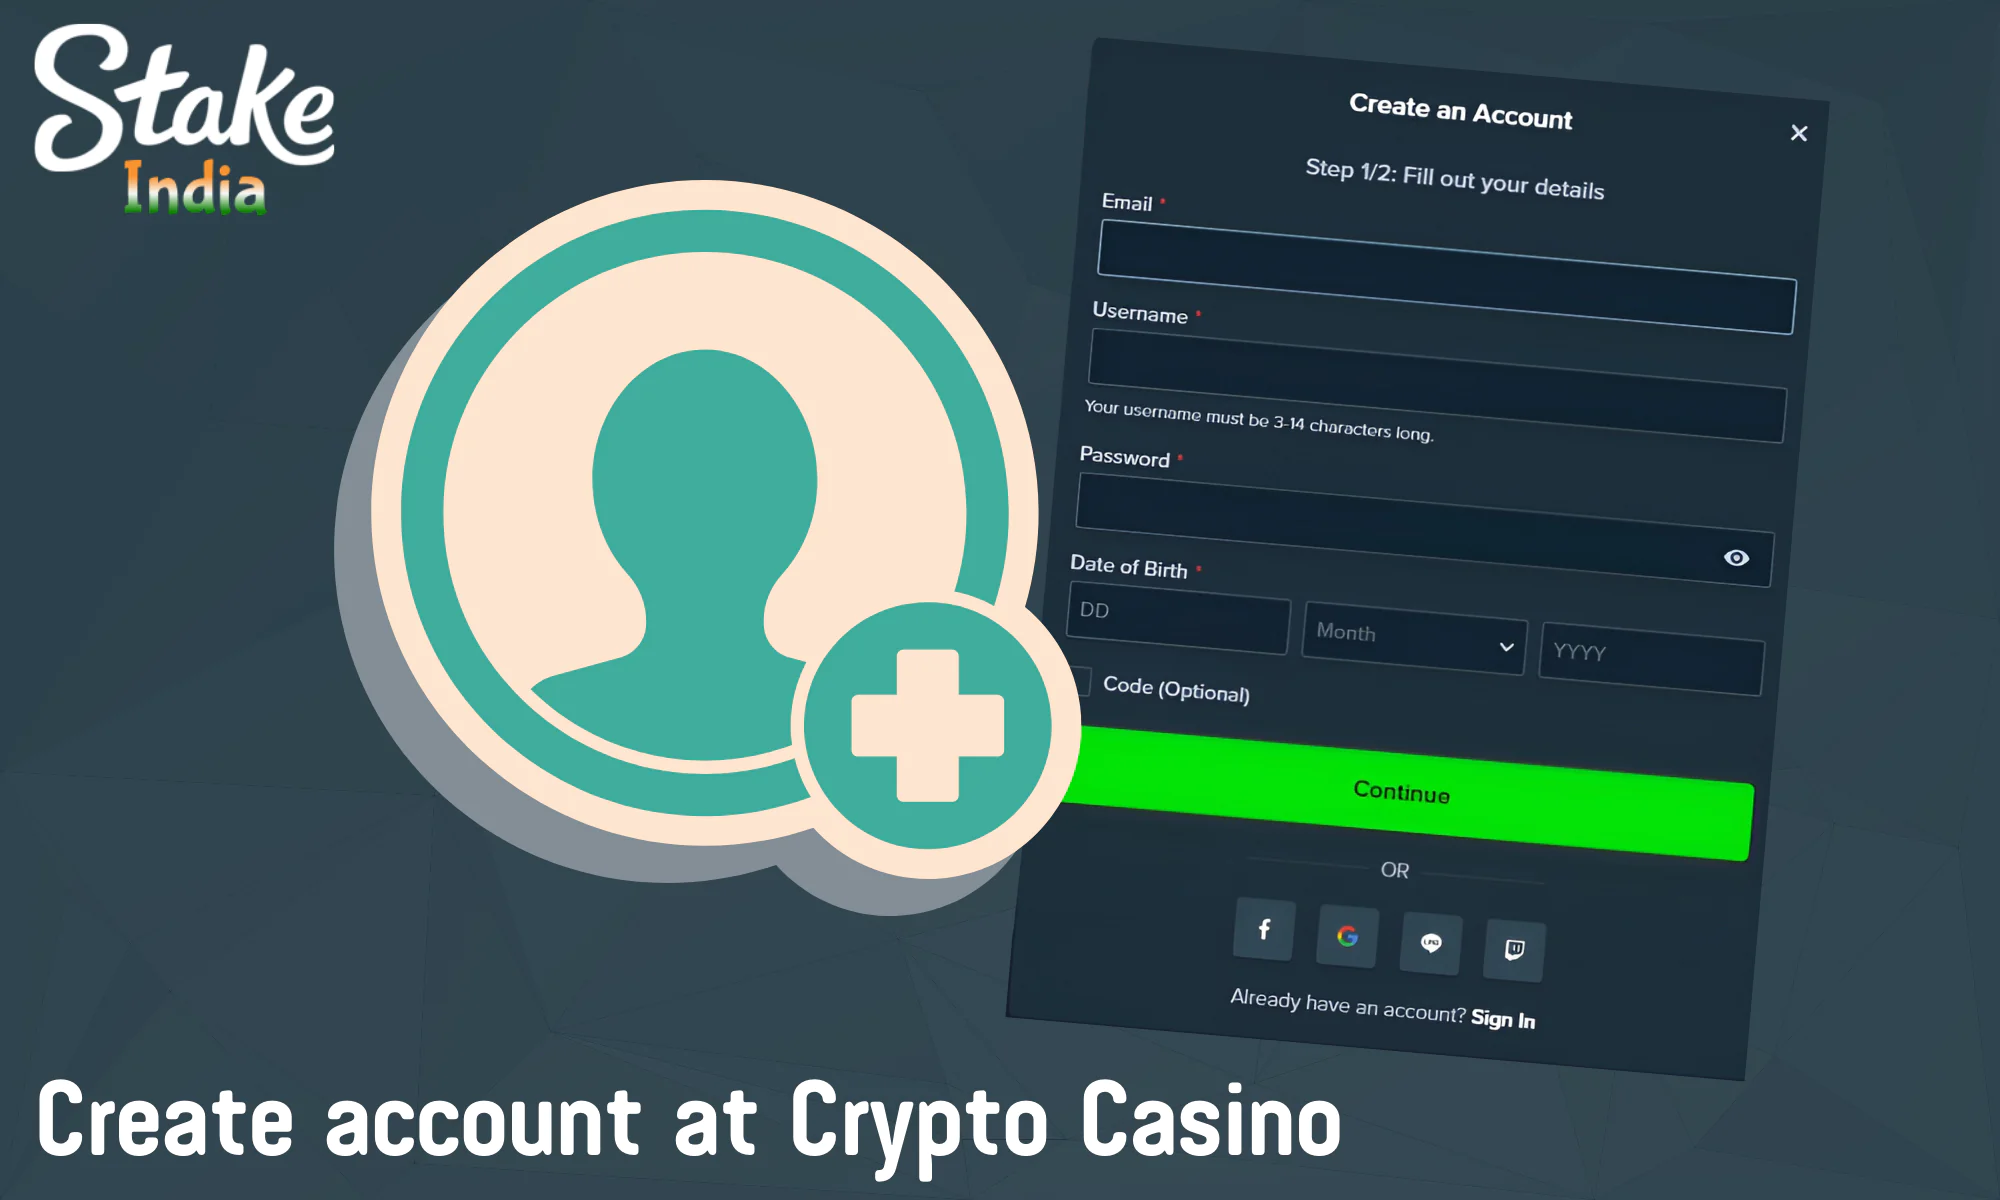 Instructions on how to easily create an account in Stake